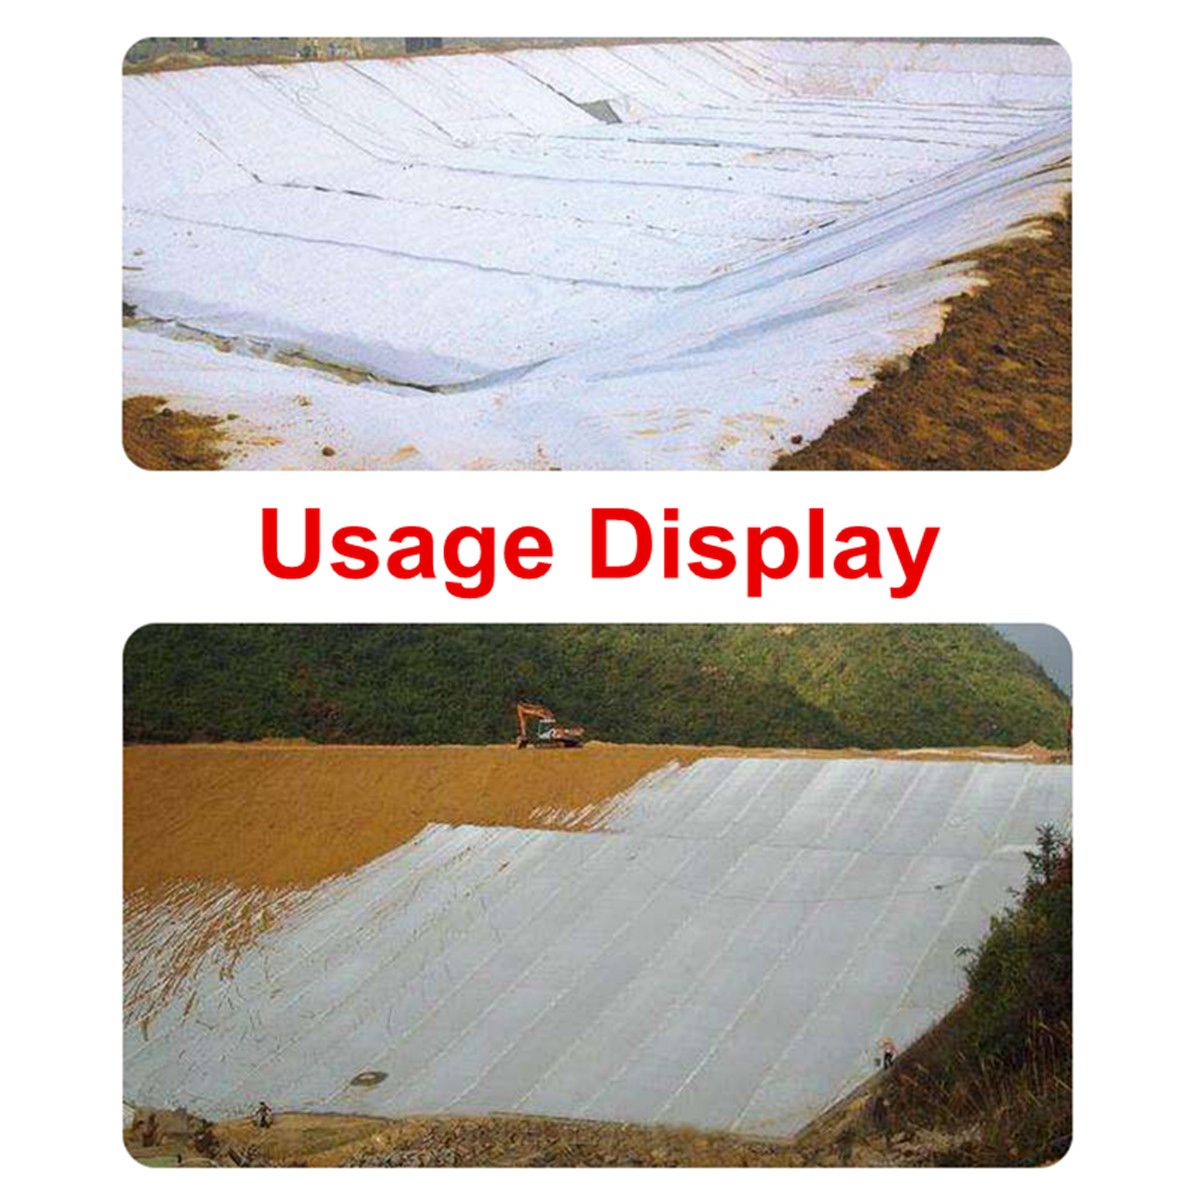 2mtimes234567m-White-Fish-Pond-Liner-Fishing-Tool-Garden-Pool-HDPE-Membrane-Reinforced-Landscaping-1303558